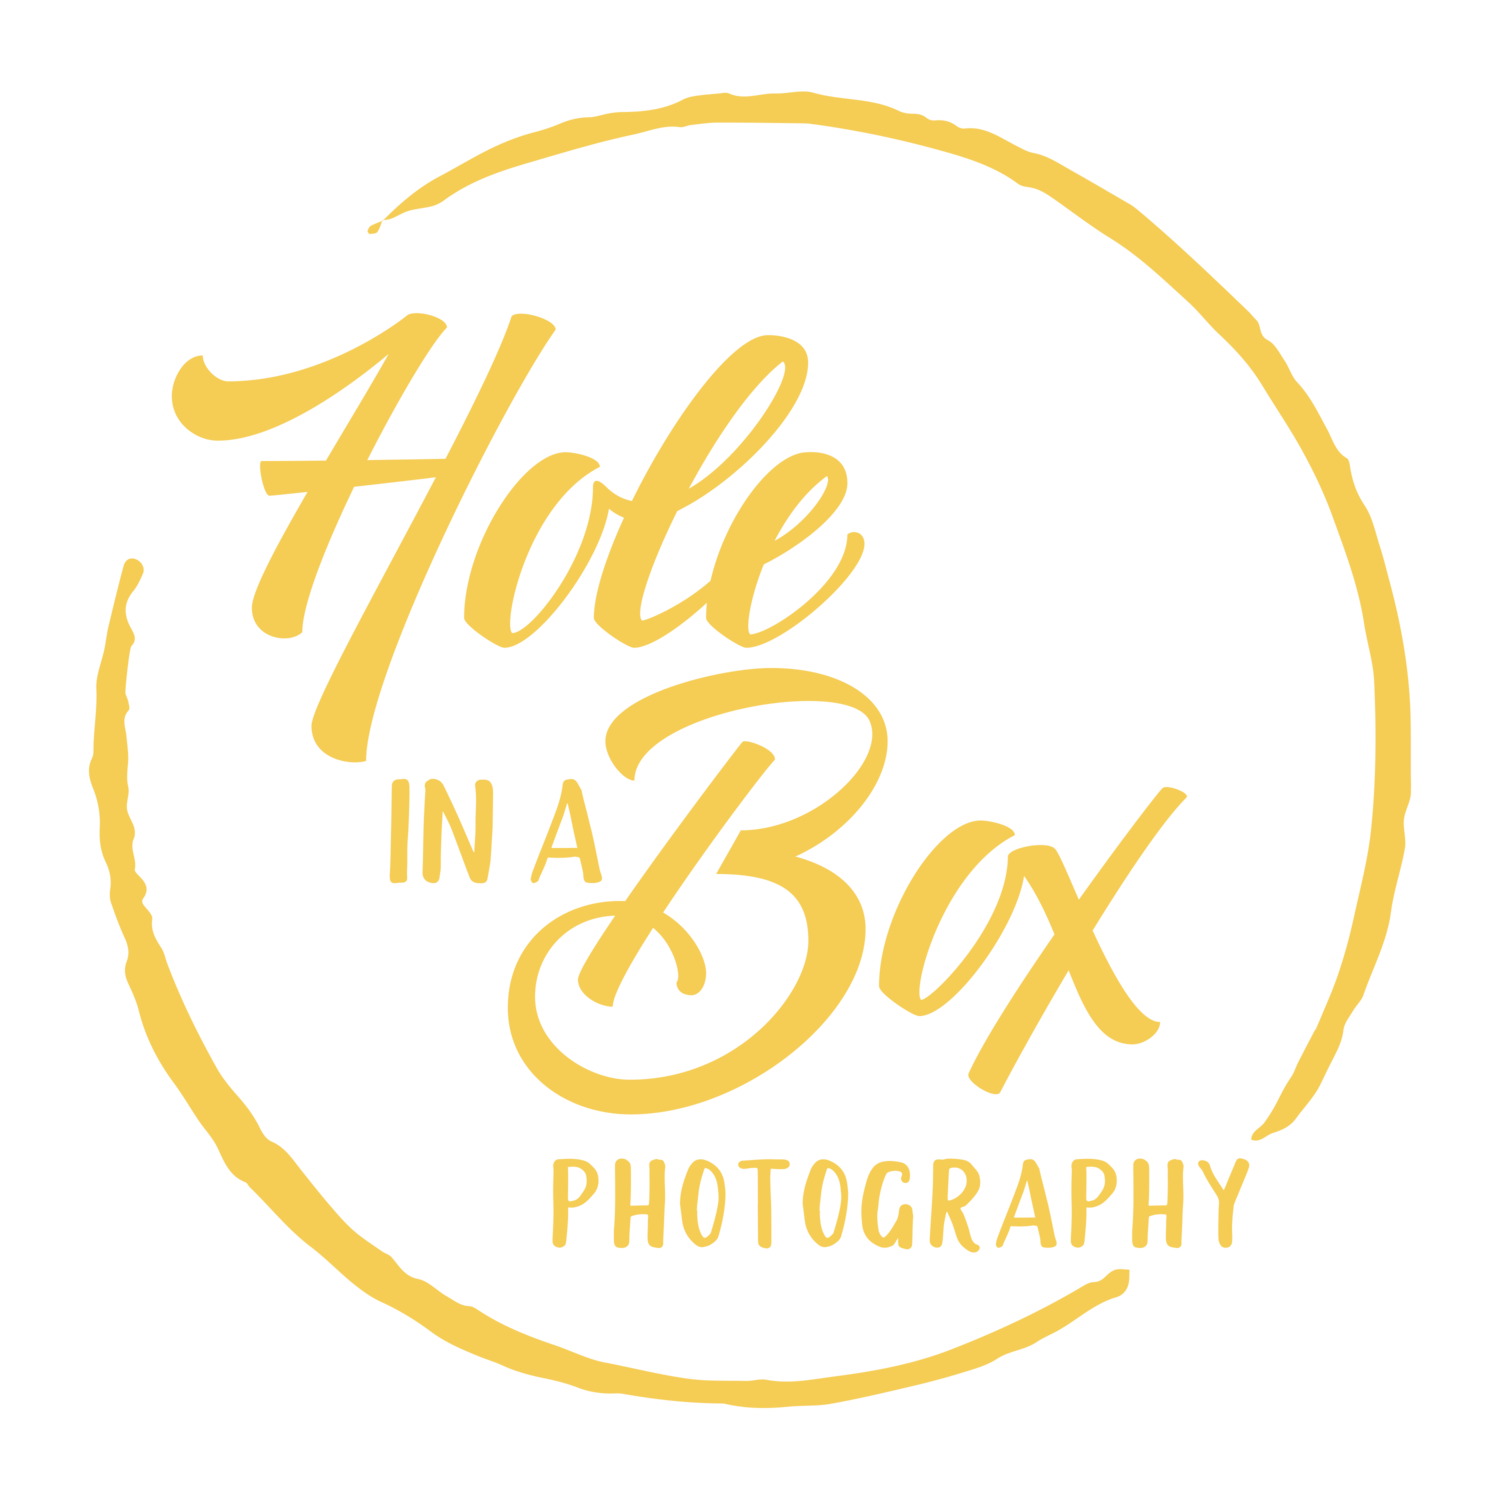 Hole in a Box